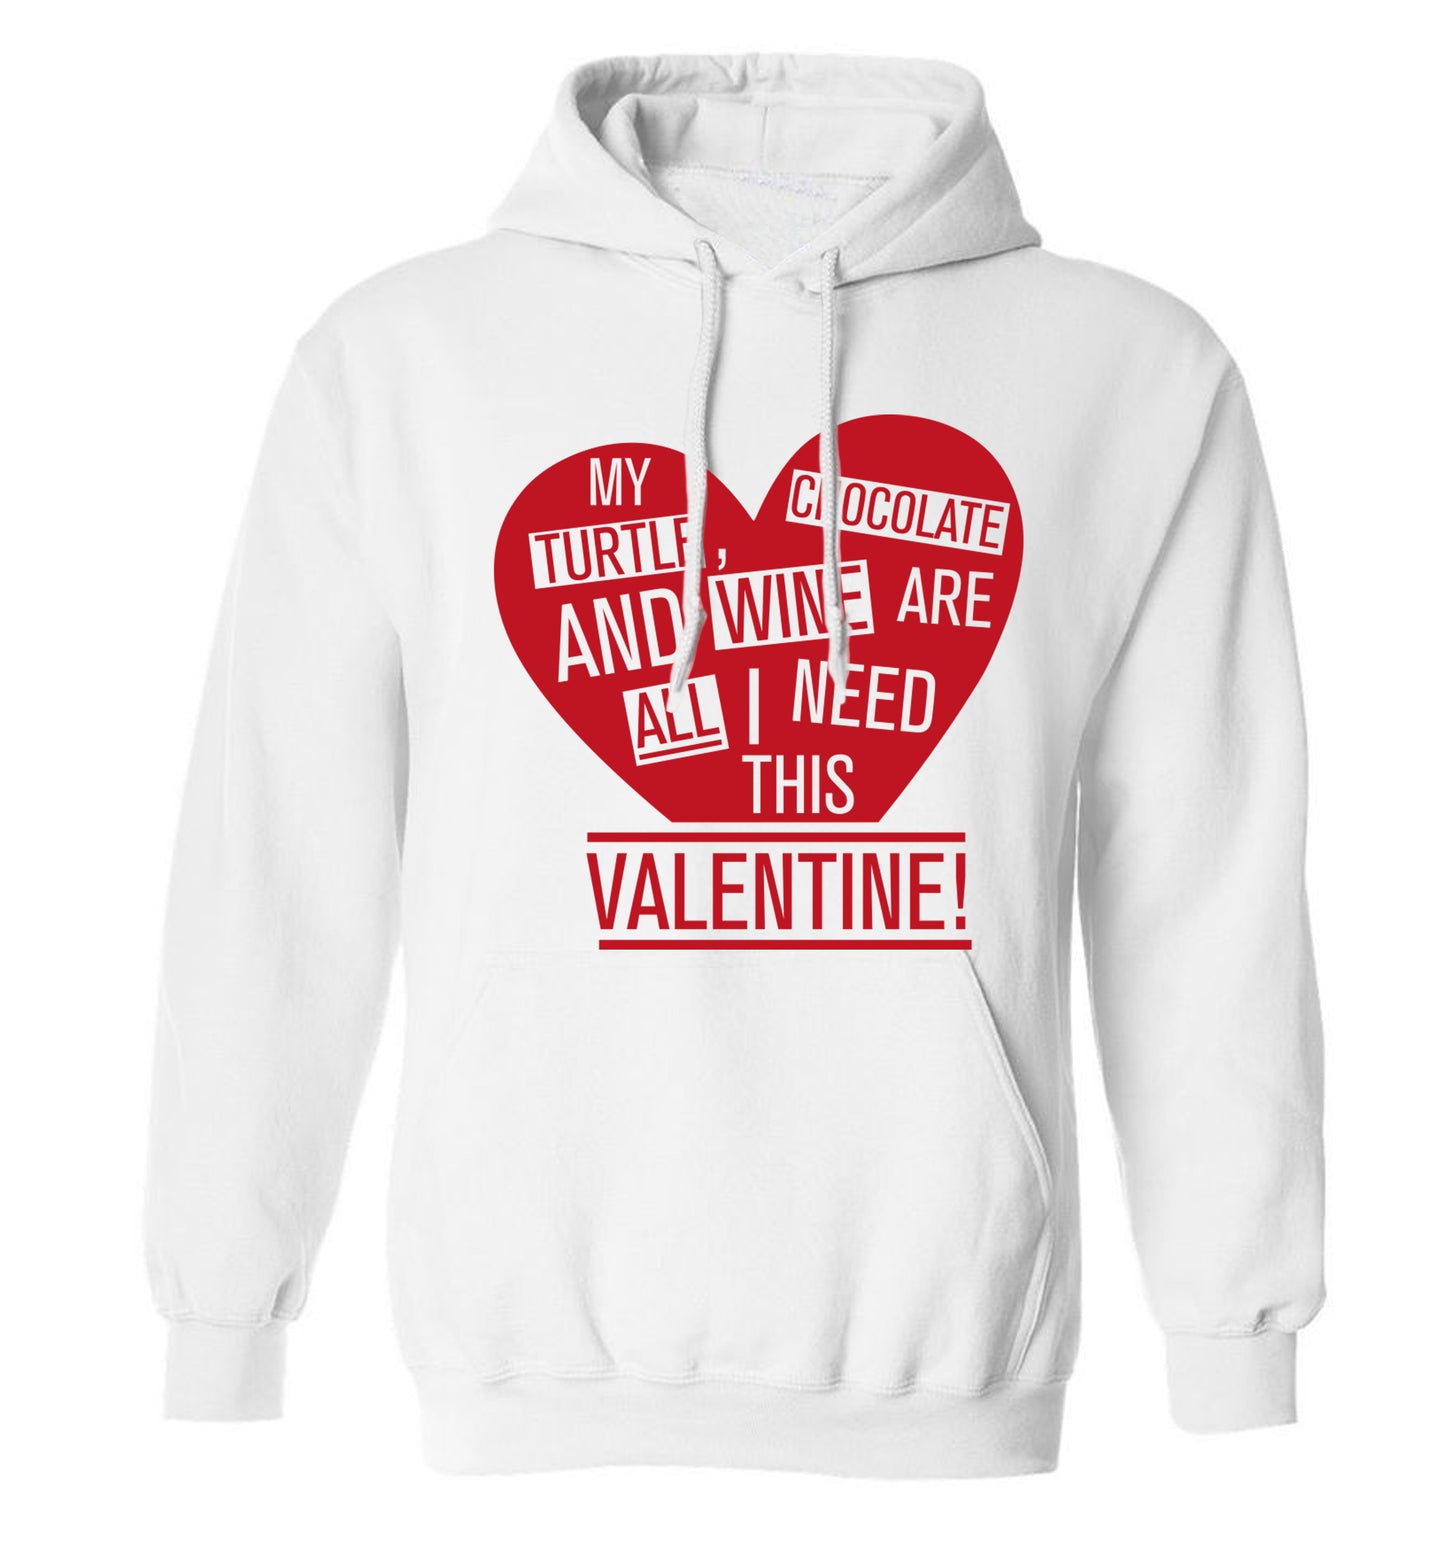 My turtle, chocolate and wine are all I need this valentine! adults unisex white hoodie 2XL